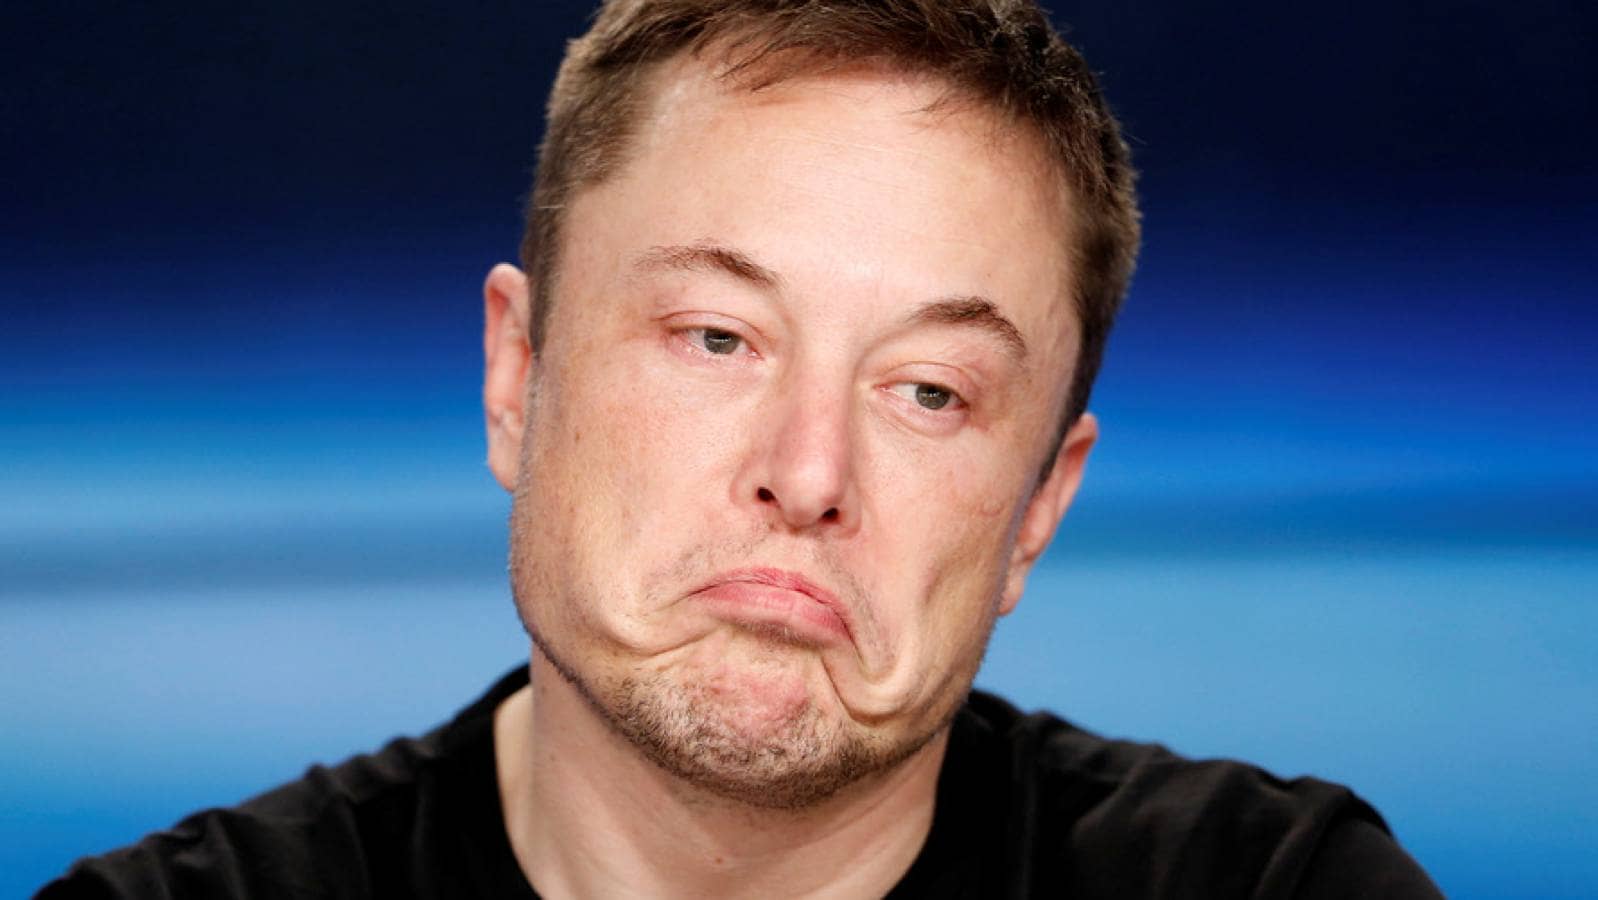 musk apologizes to unsworth for calling him pedo